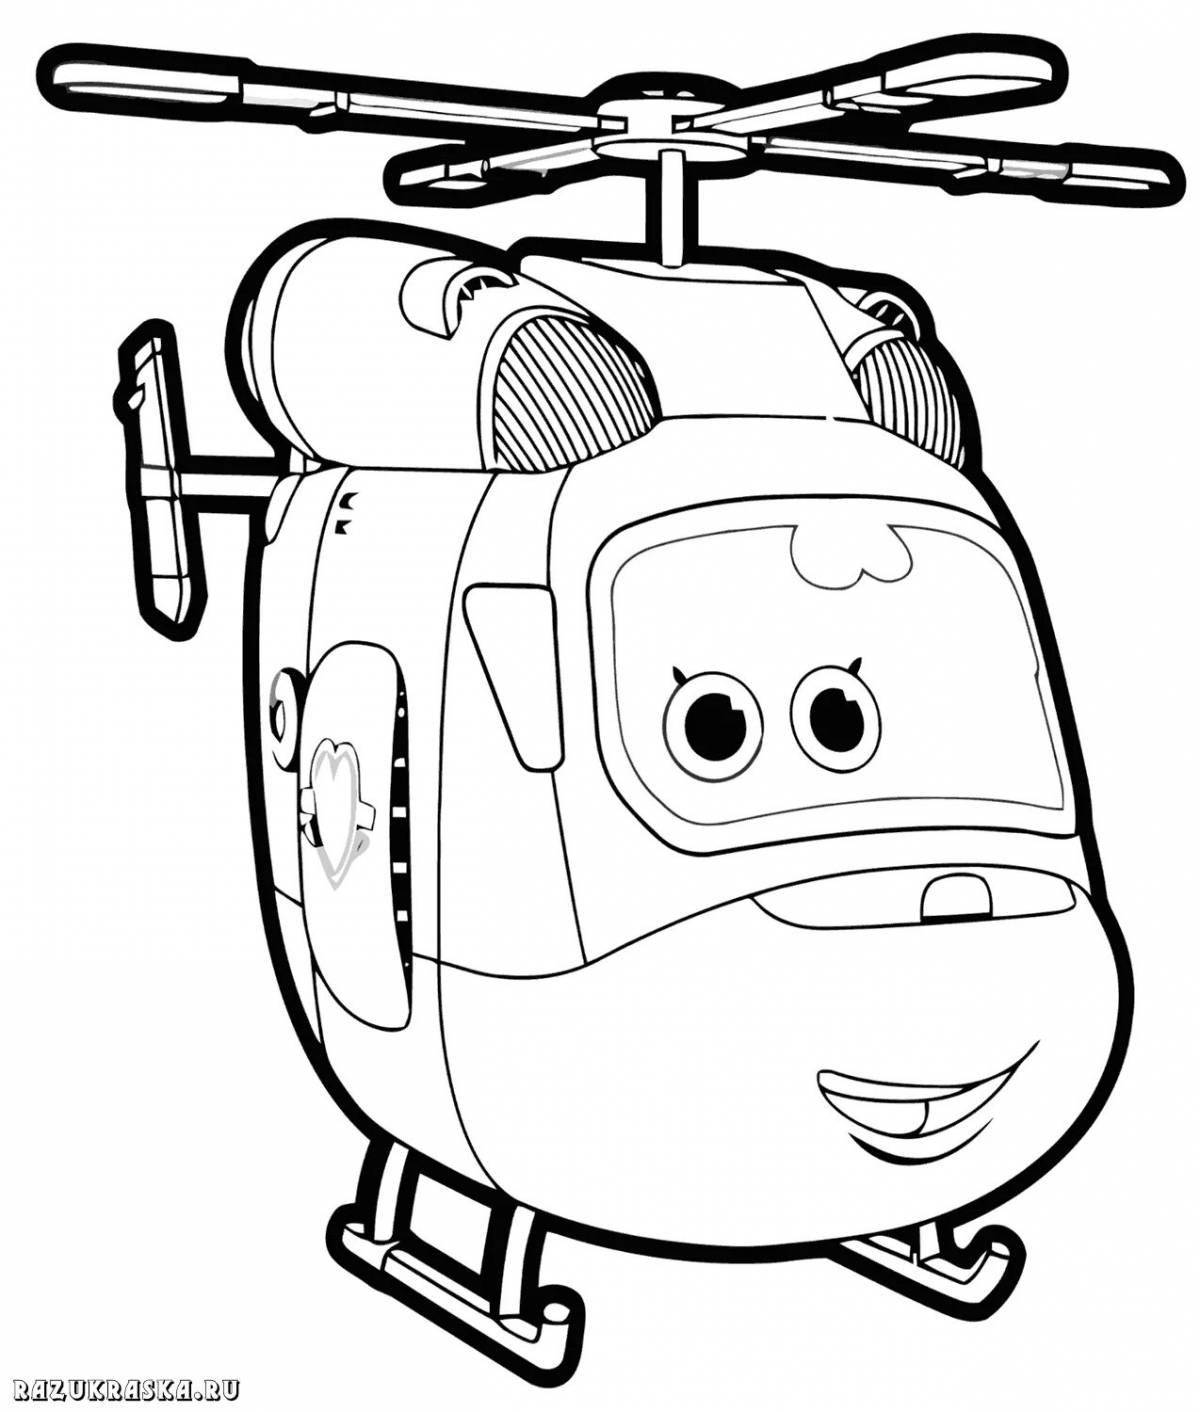 Coloring book shiny donnie super wings